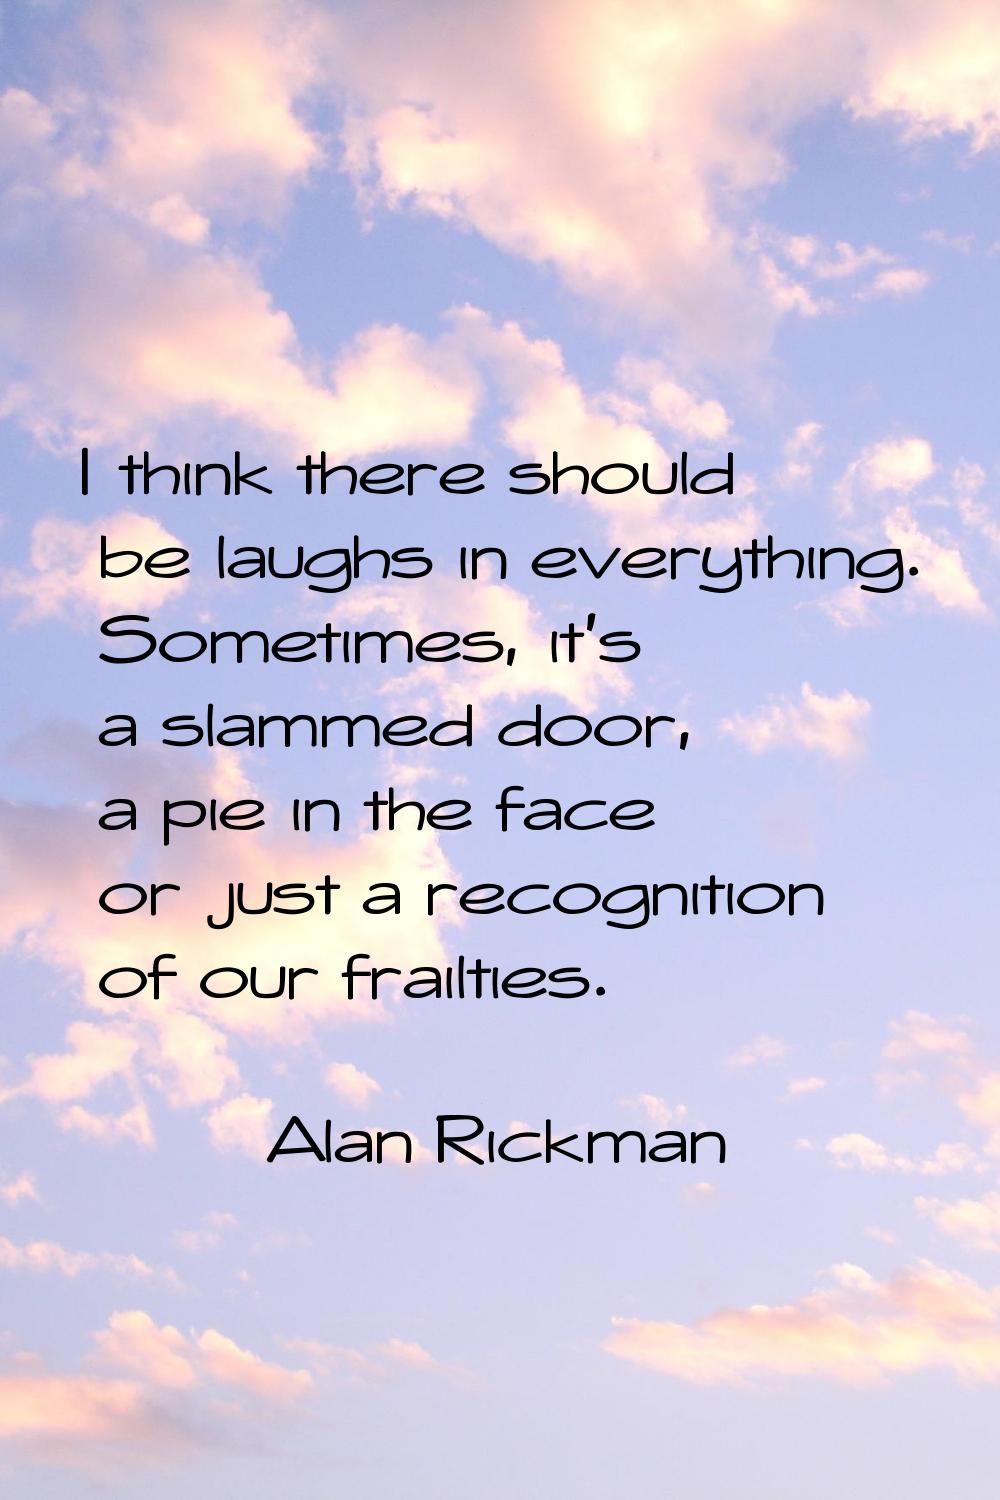 I think there should be laughs in everything. Sometimes, it's a slammed door, a pie in the face or 